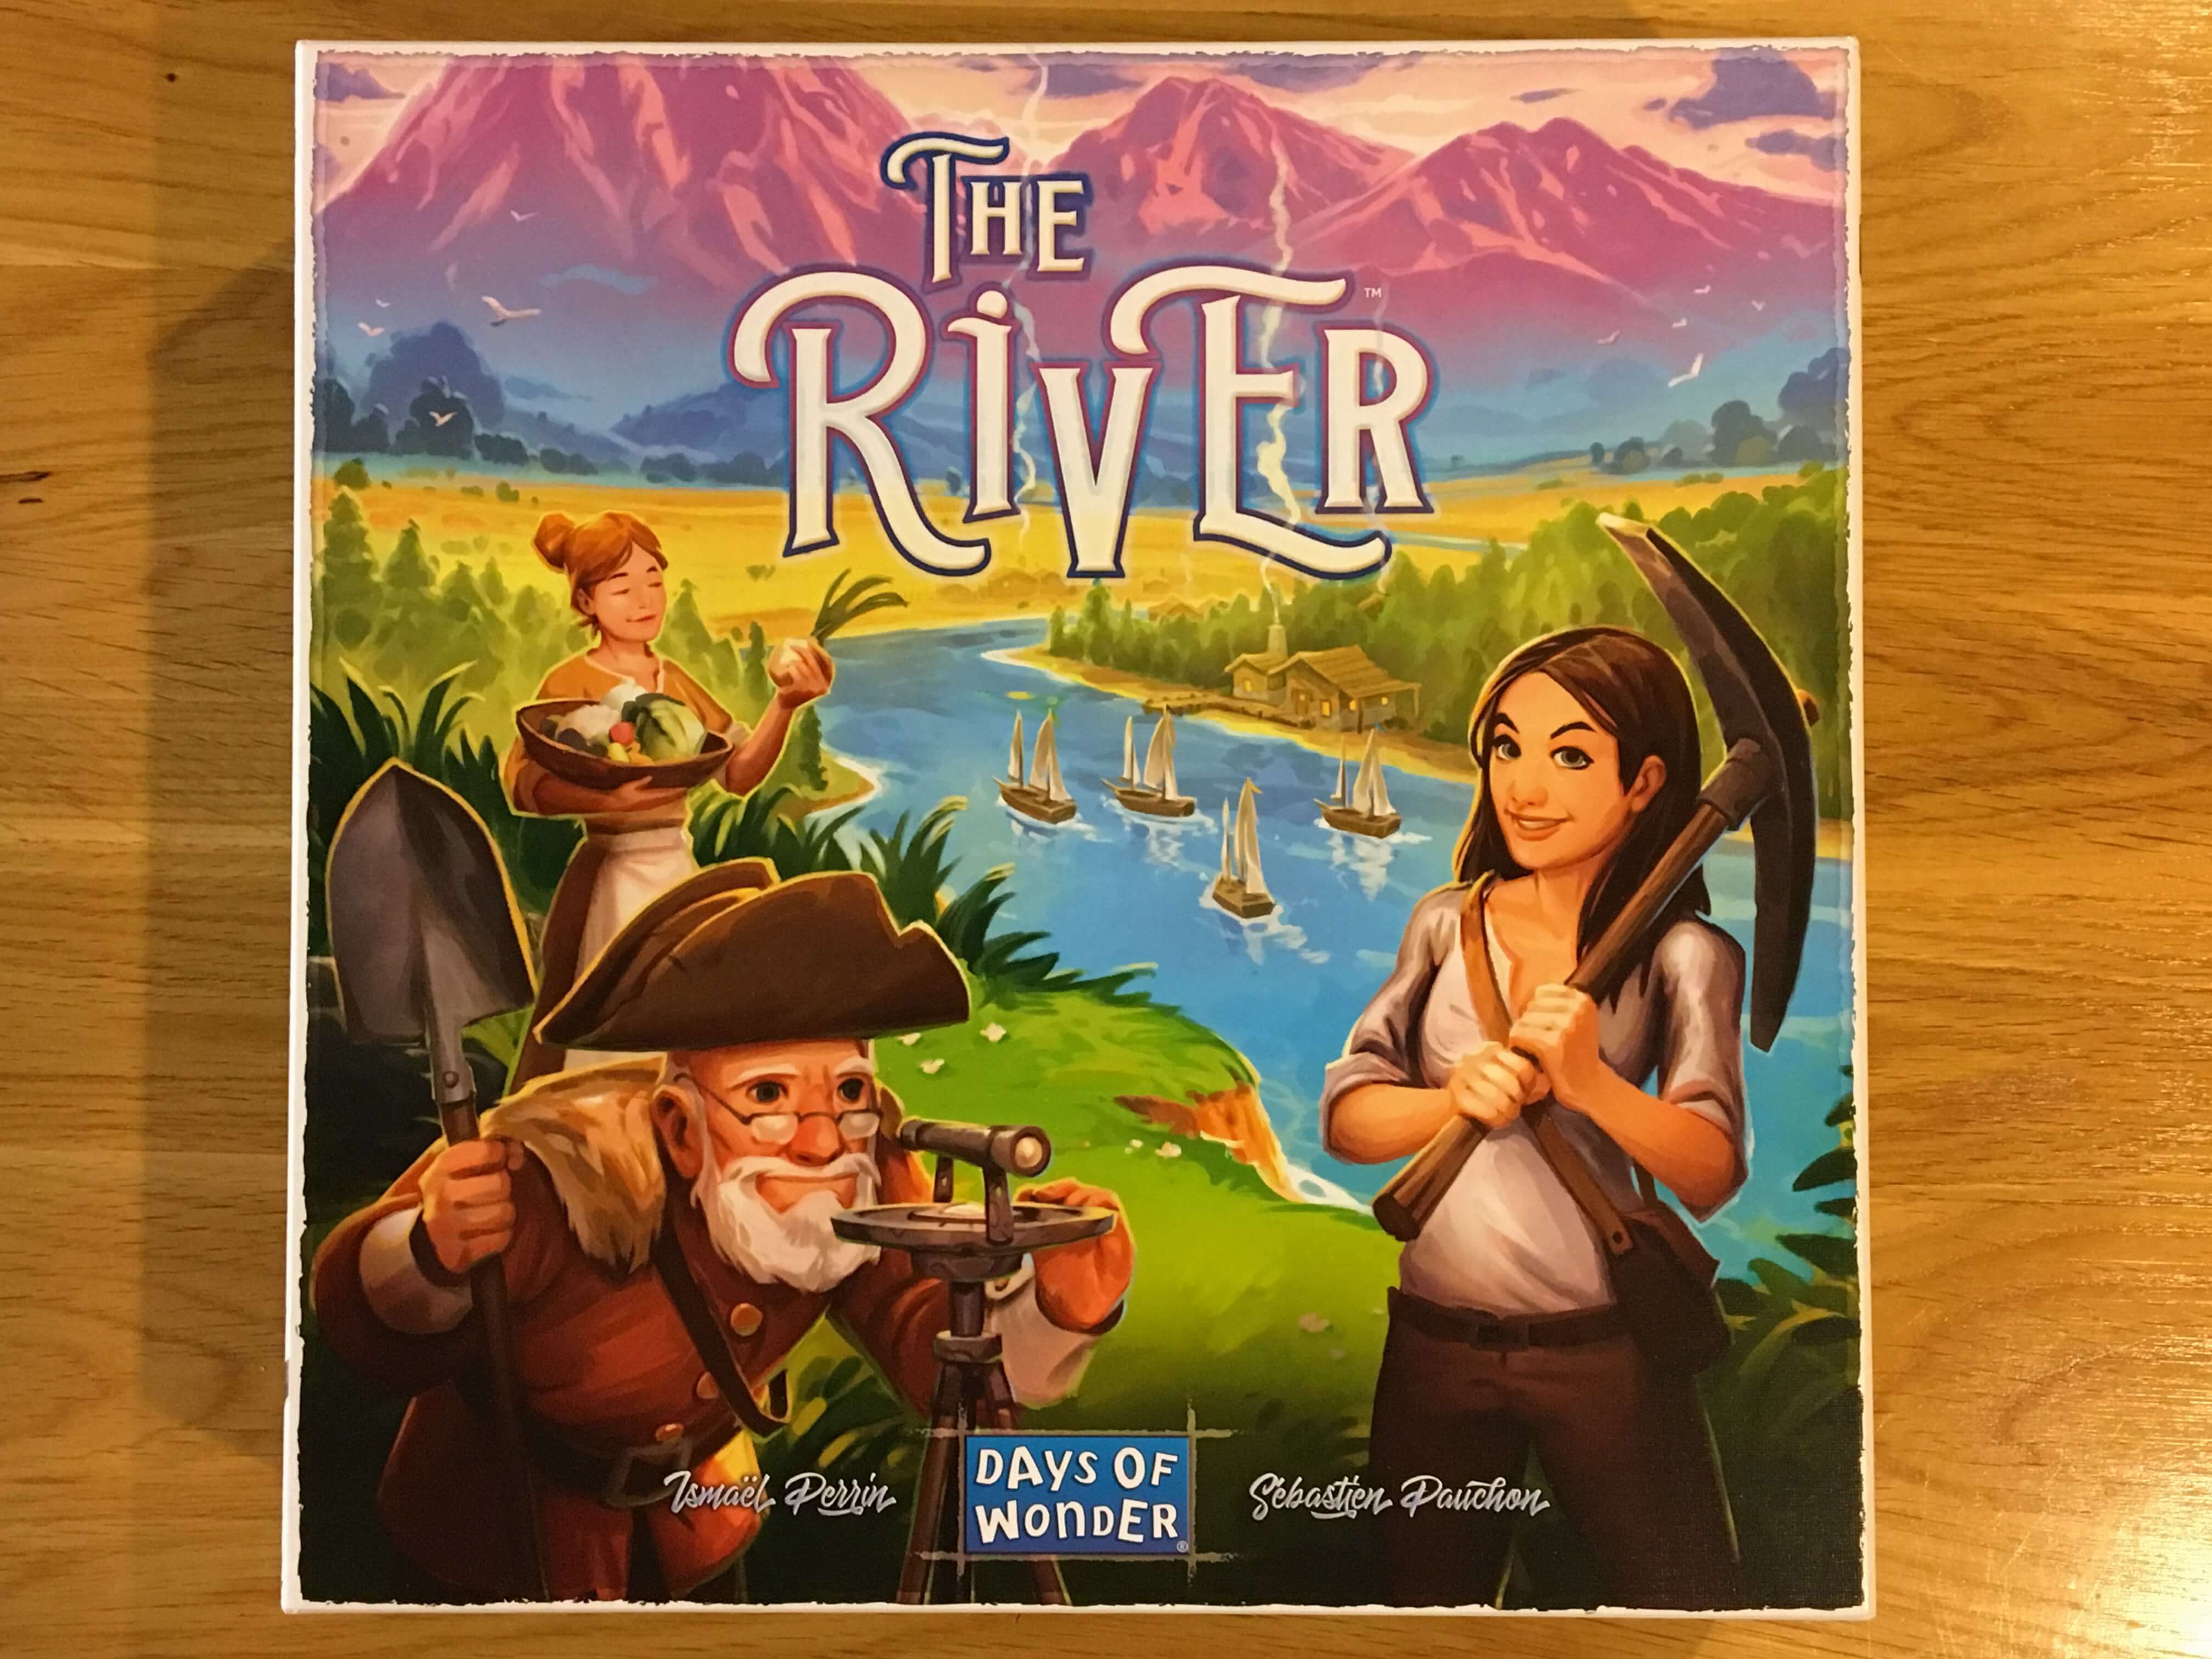 The River Review